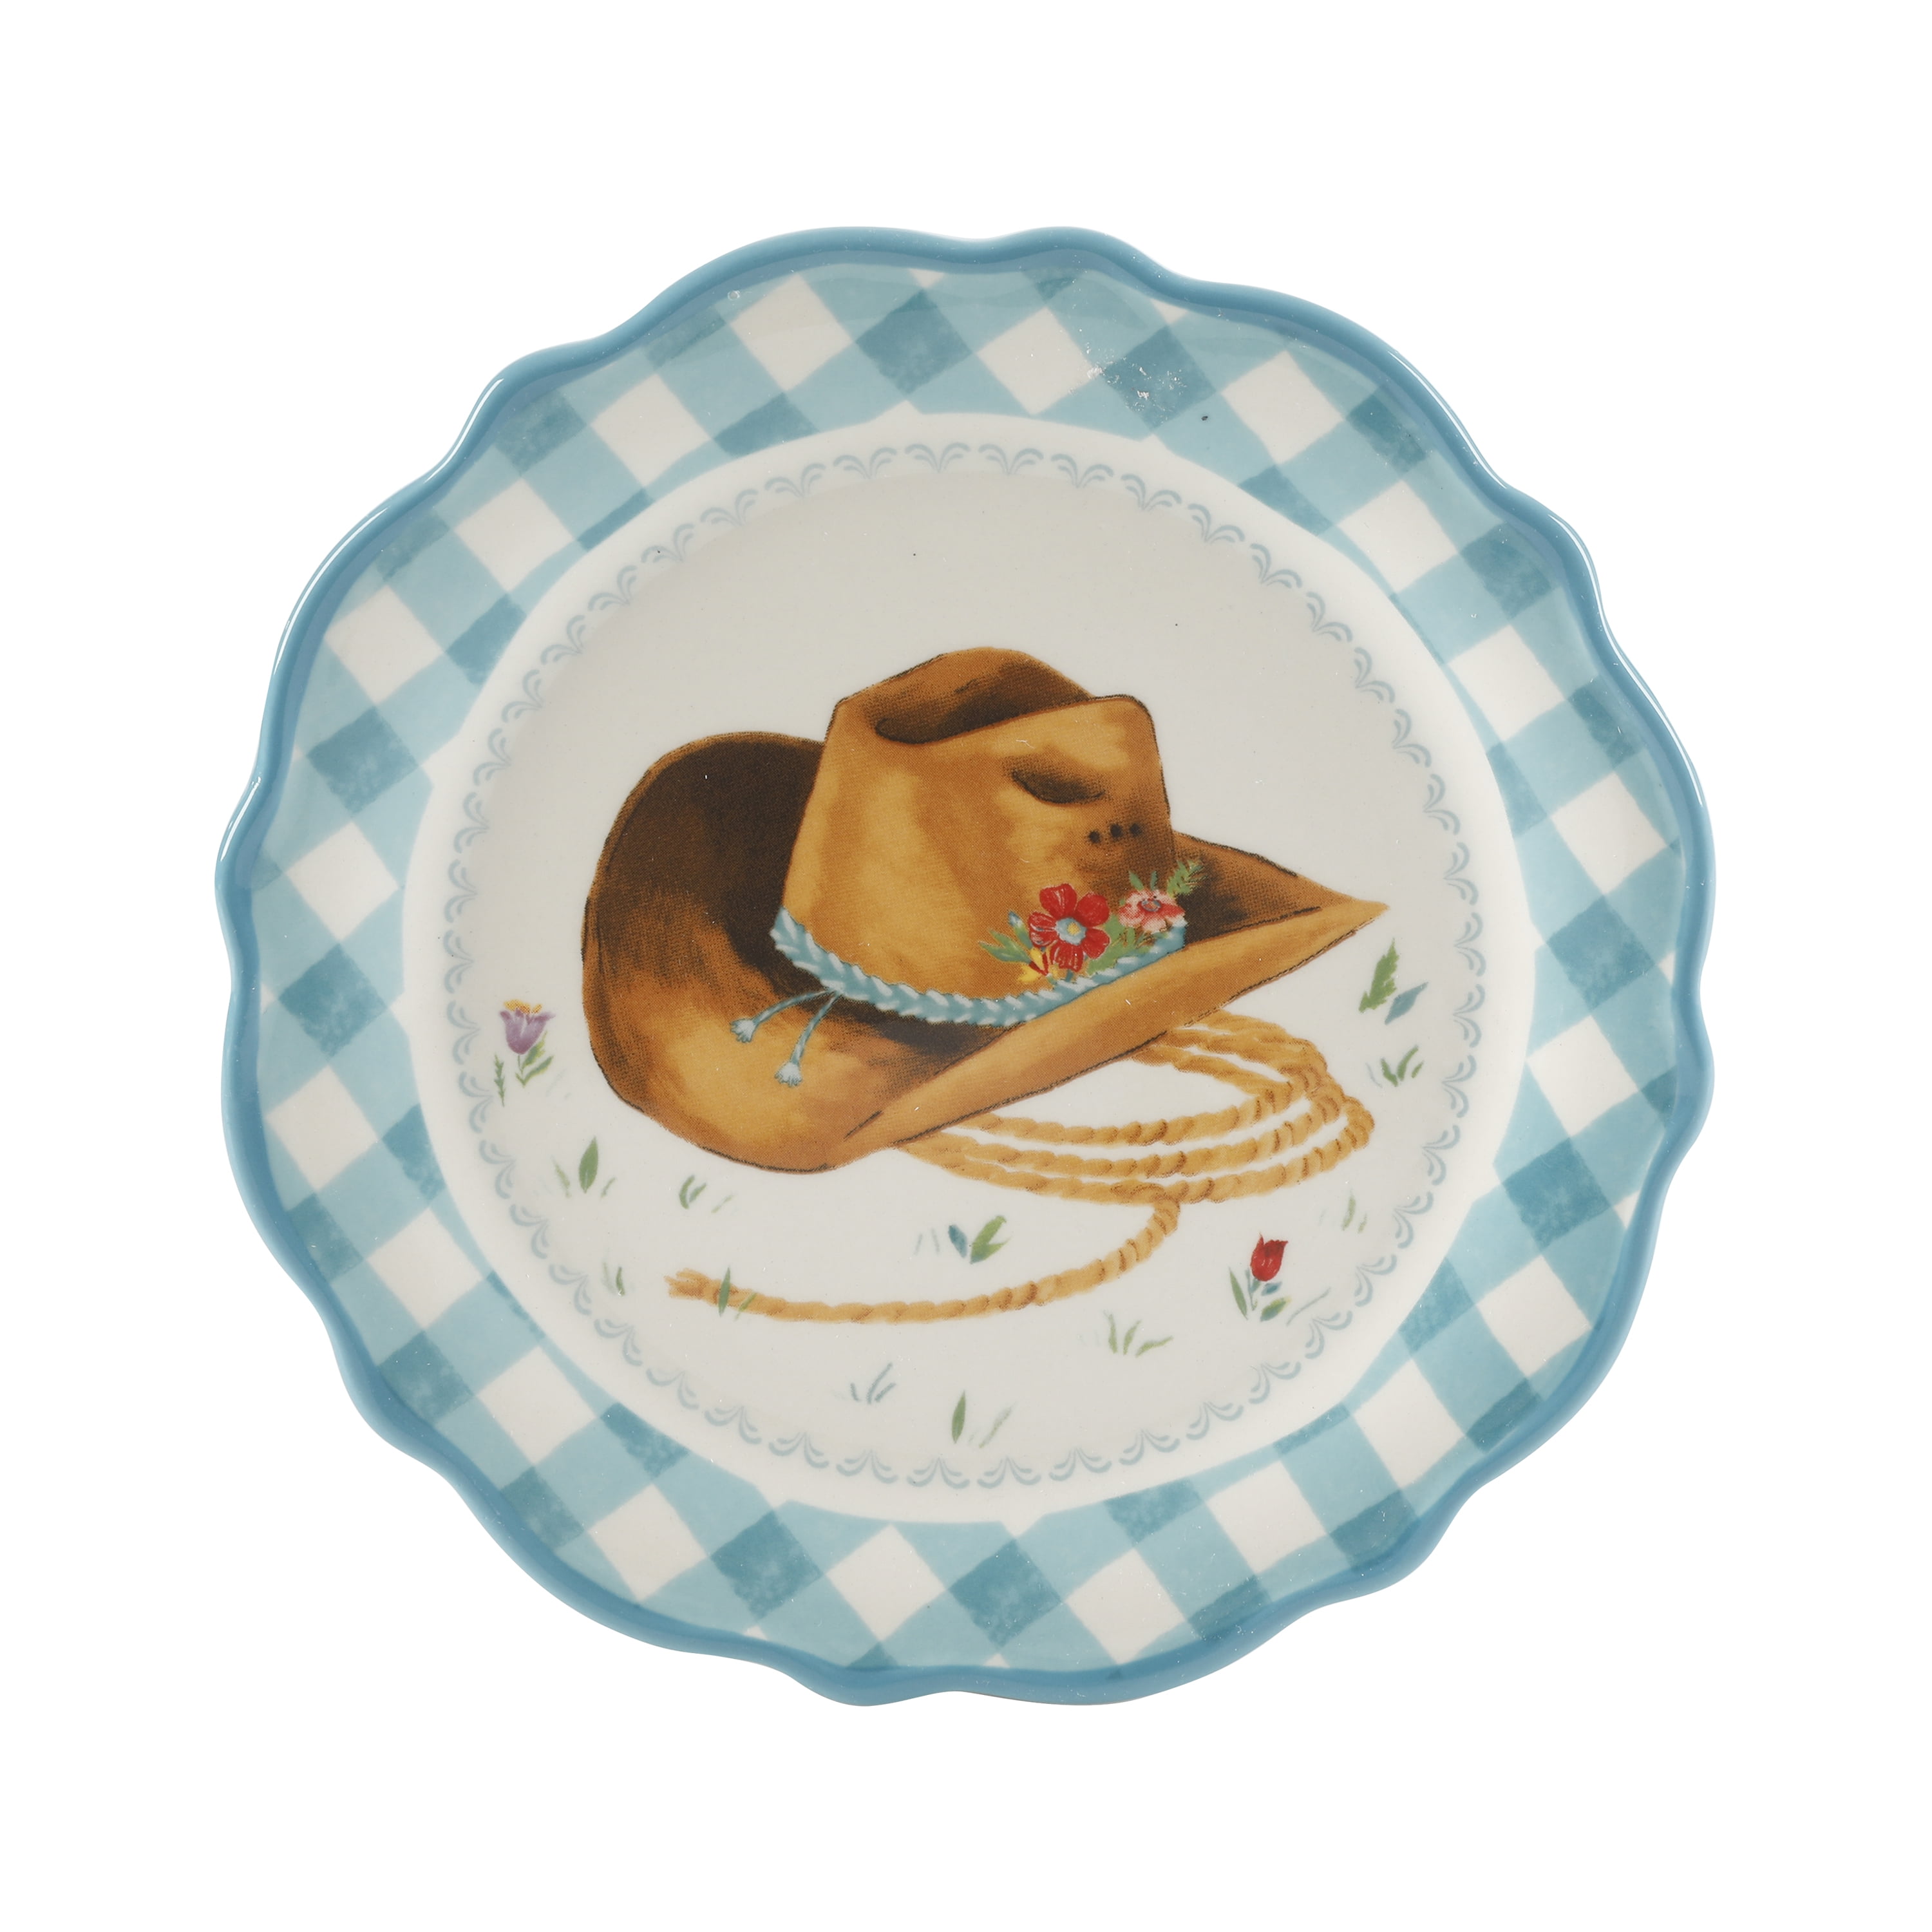 The Pioneer Woman Novelty 7-Inch Plates with Rack, 7-Piece Set